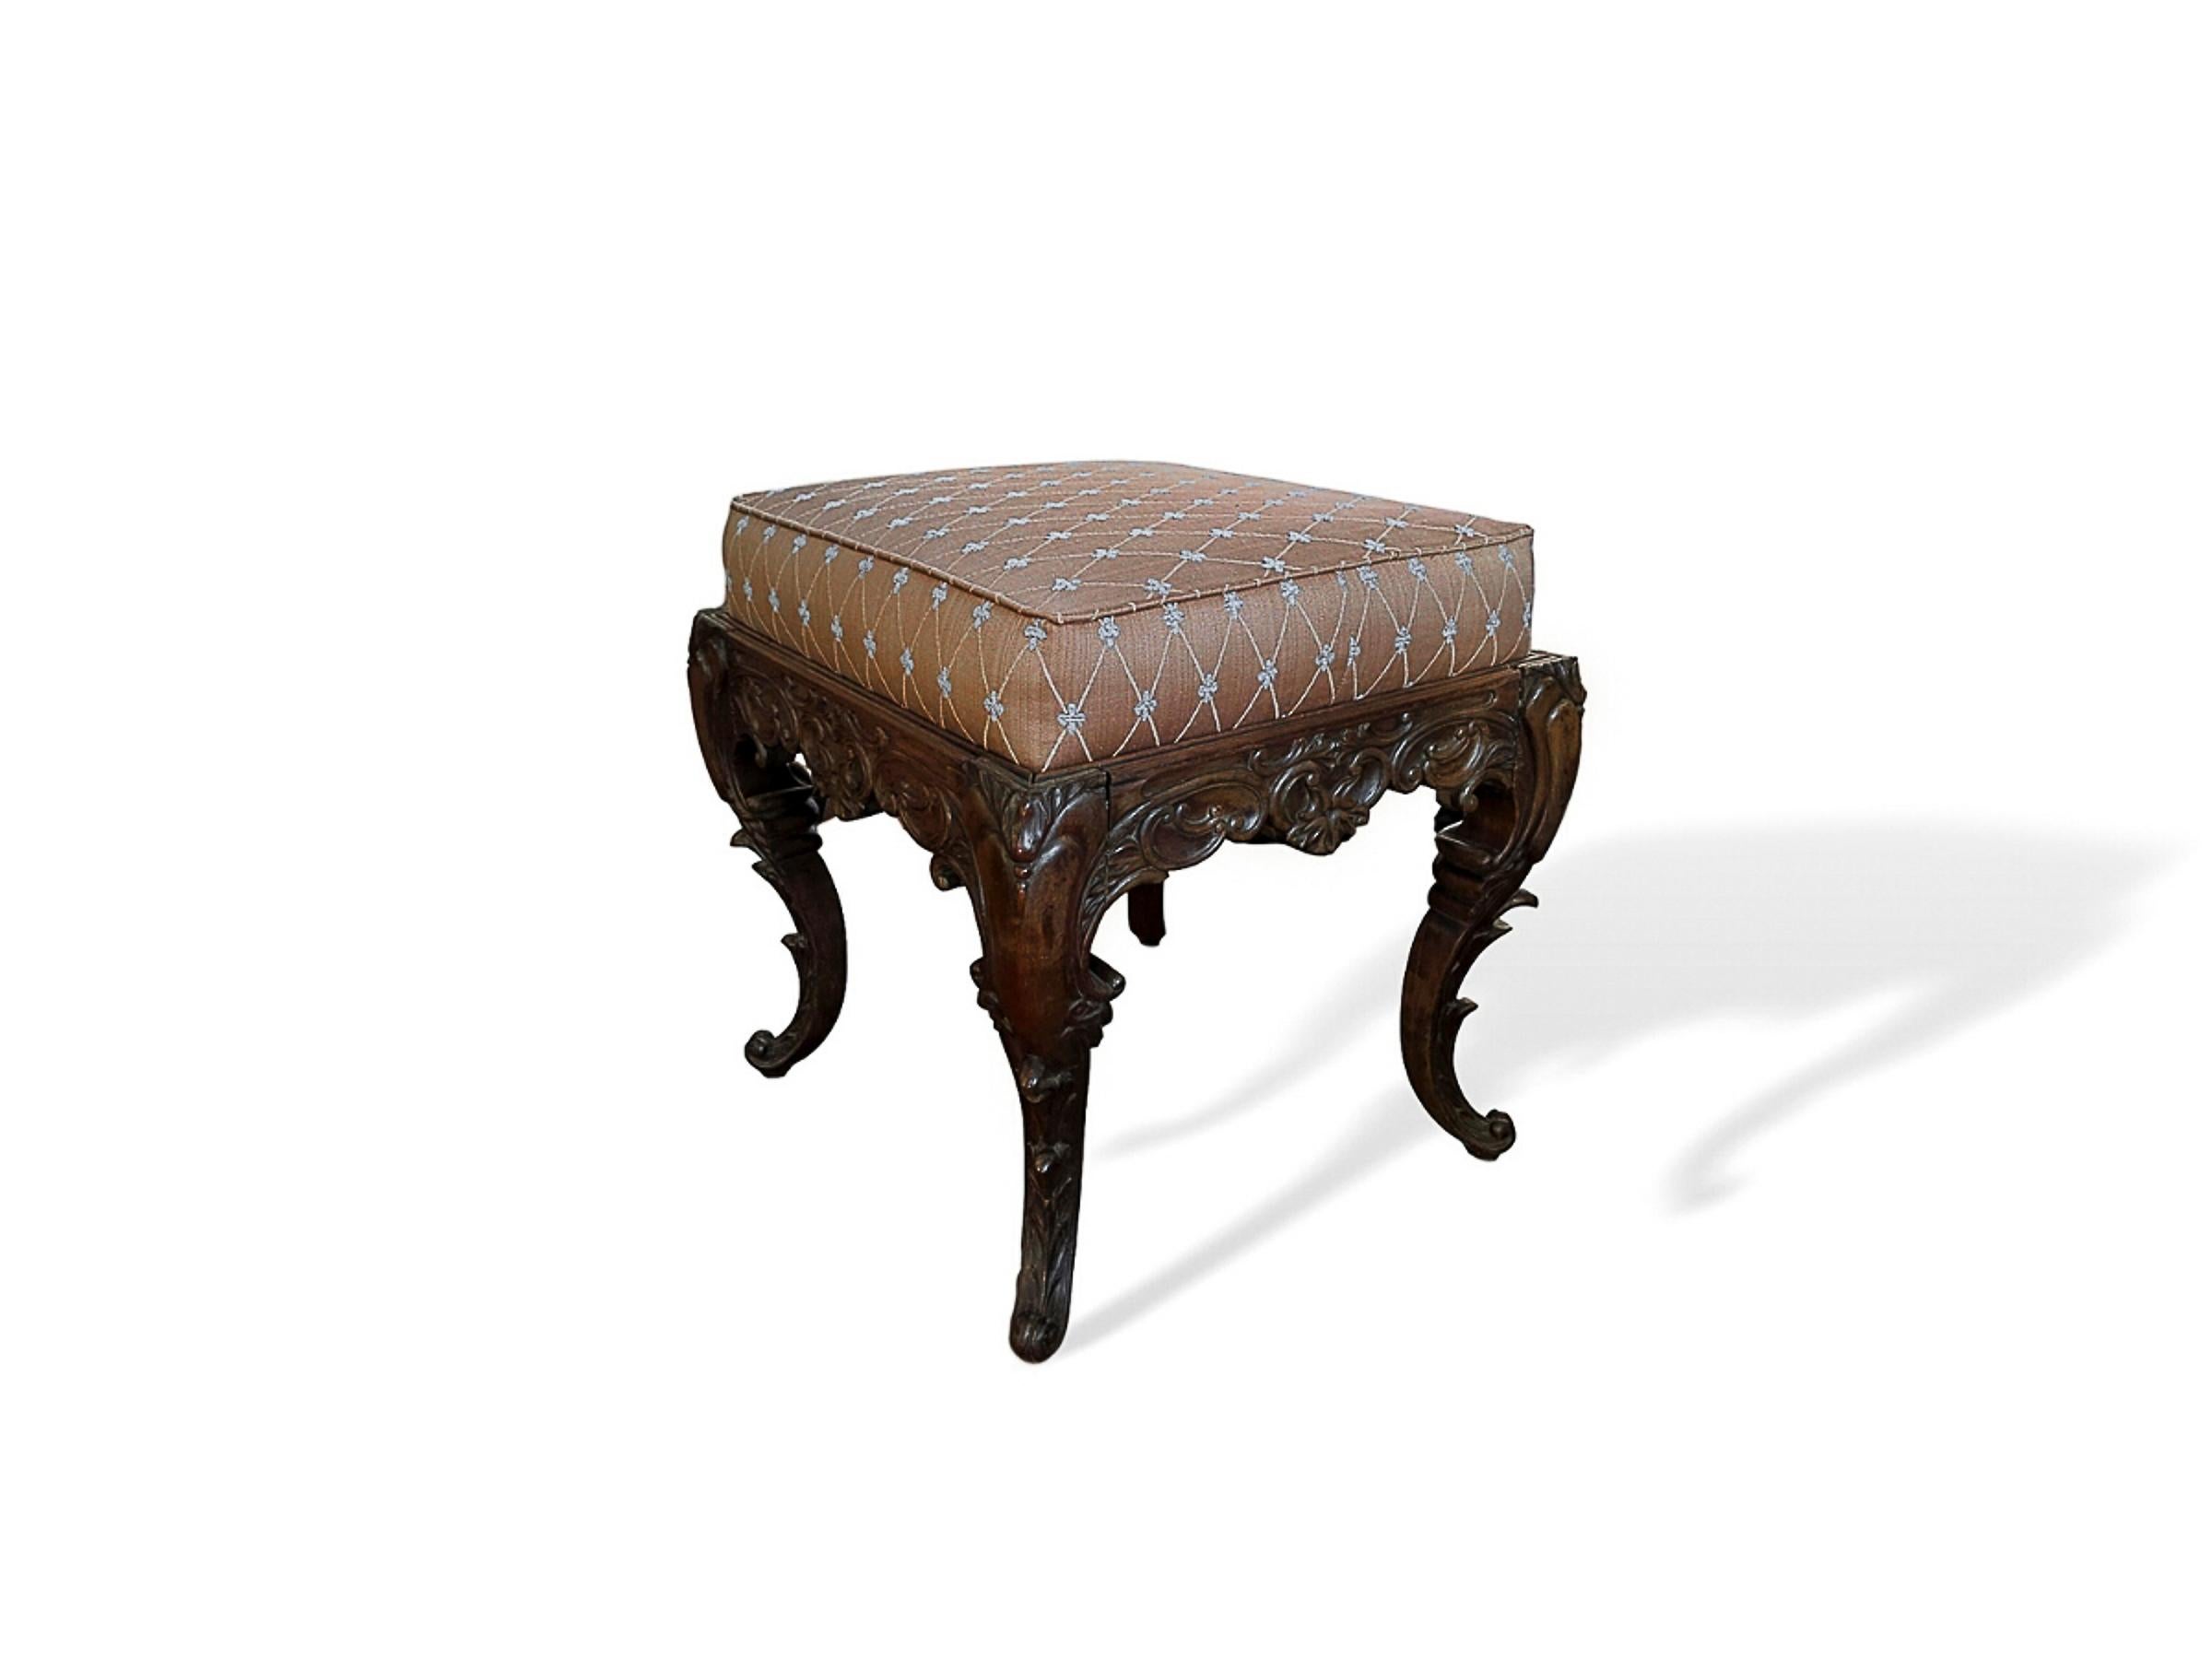 Early 19th century Rocco style hand carved mahogany stool with re-upholstered top.